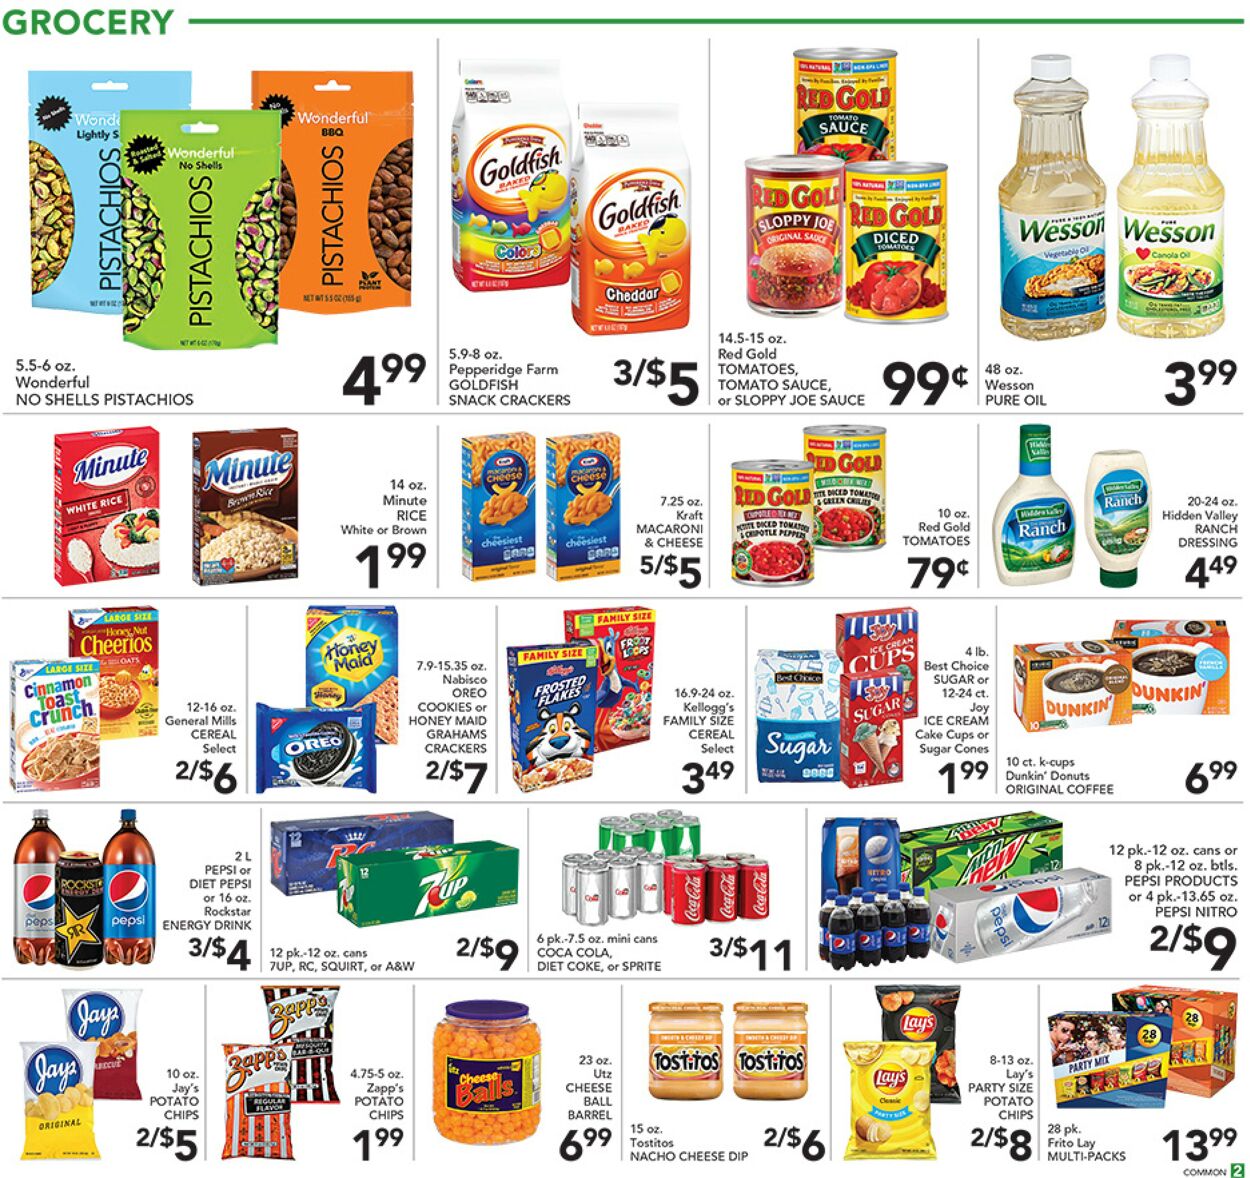 Weekly ad Pete's Fresh Market 04/27/2022 - 05/03/2022